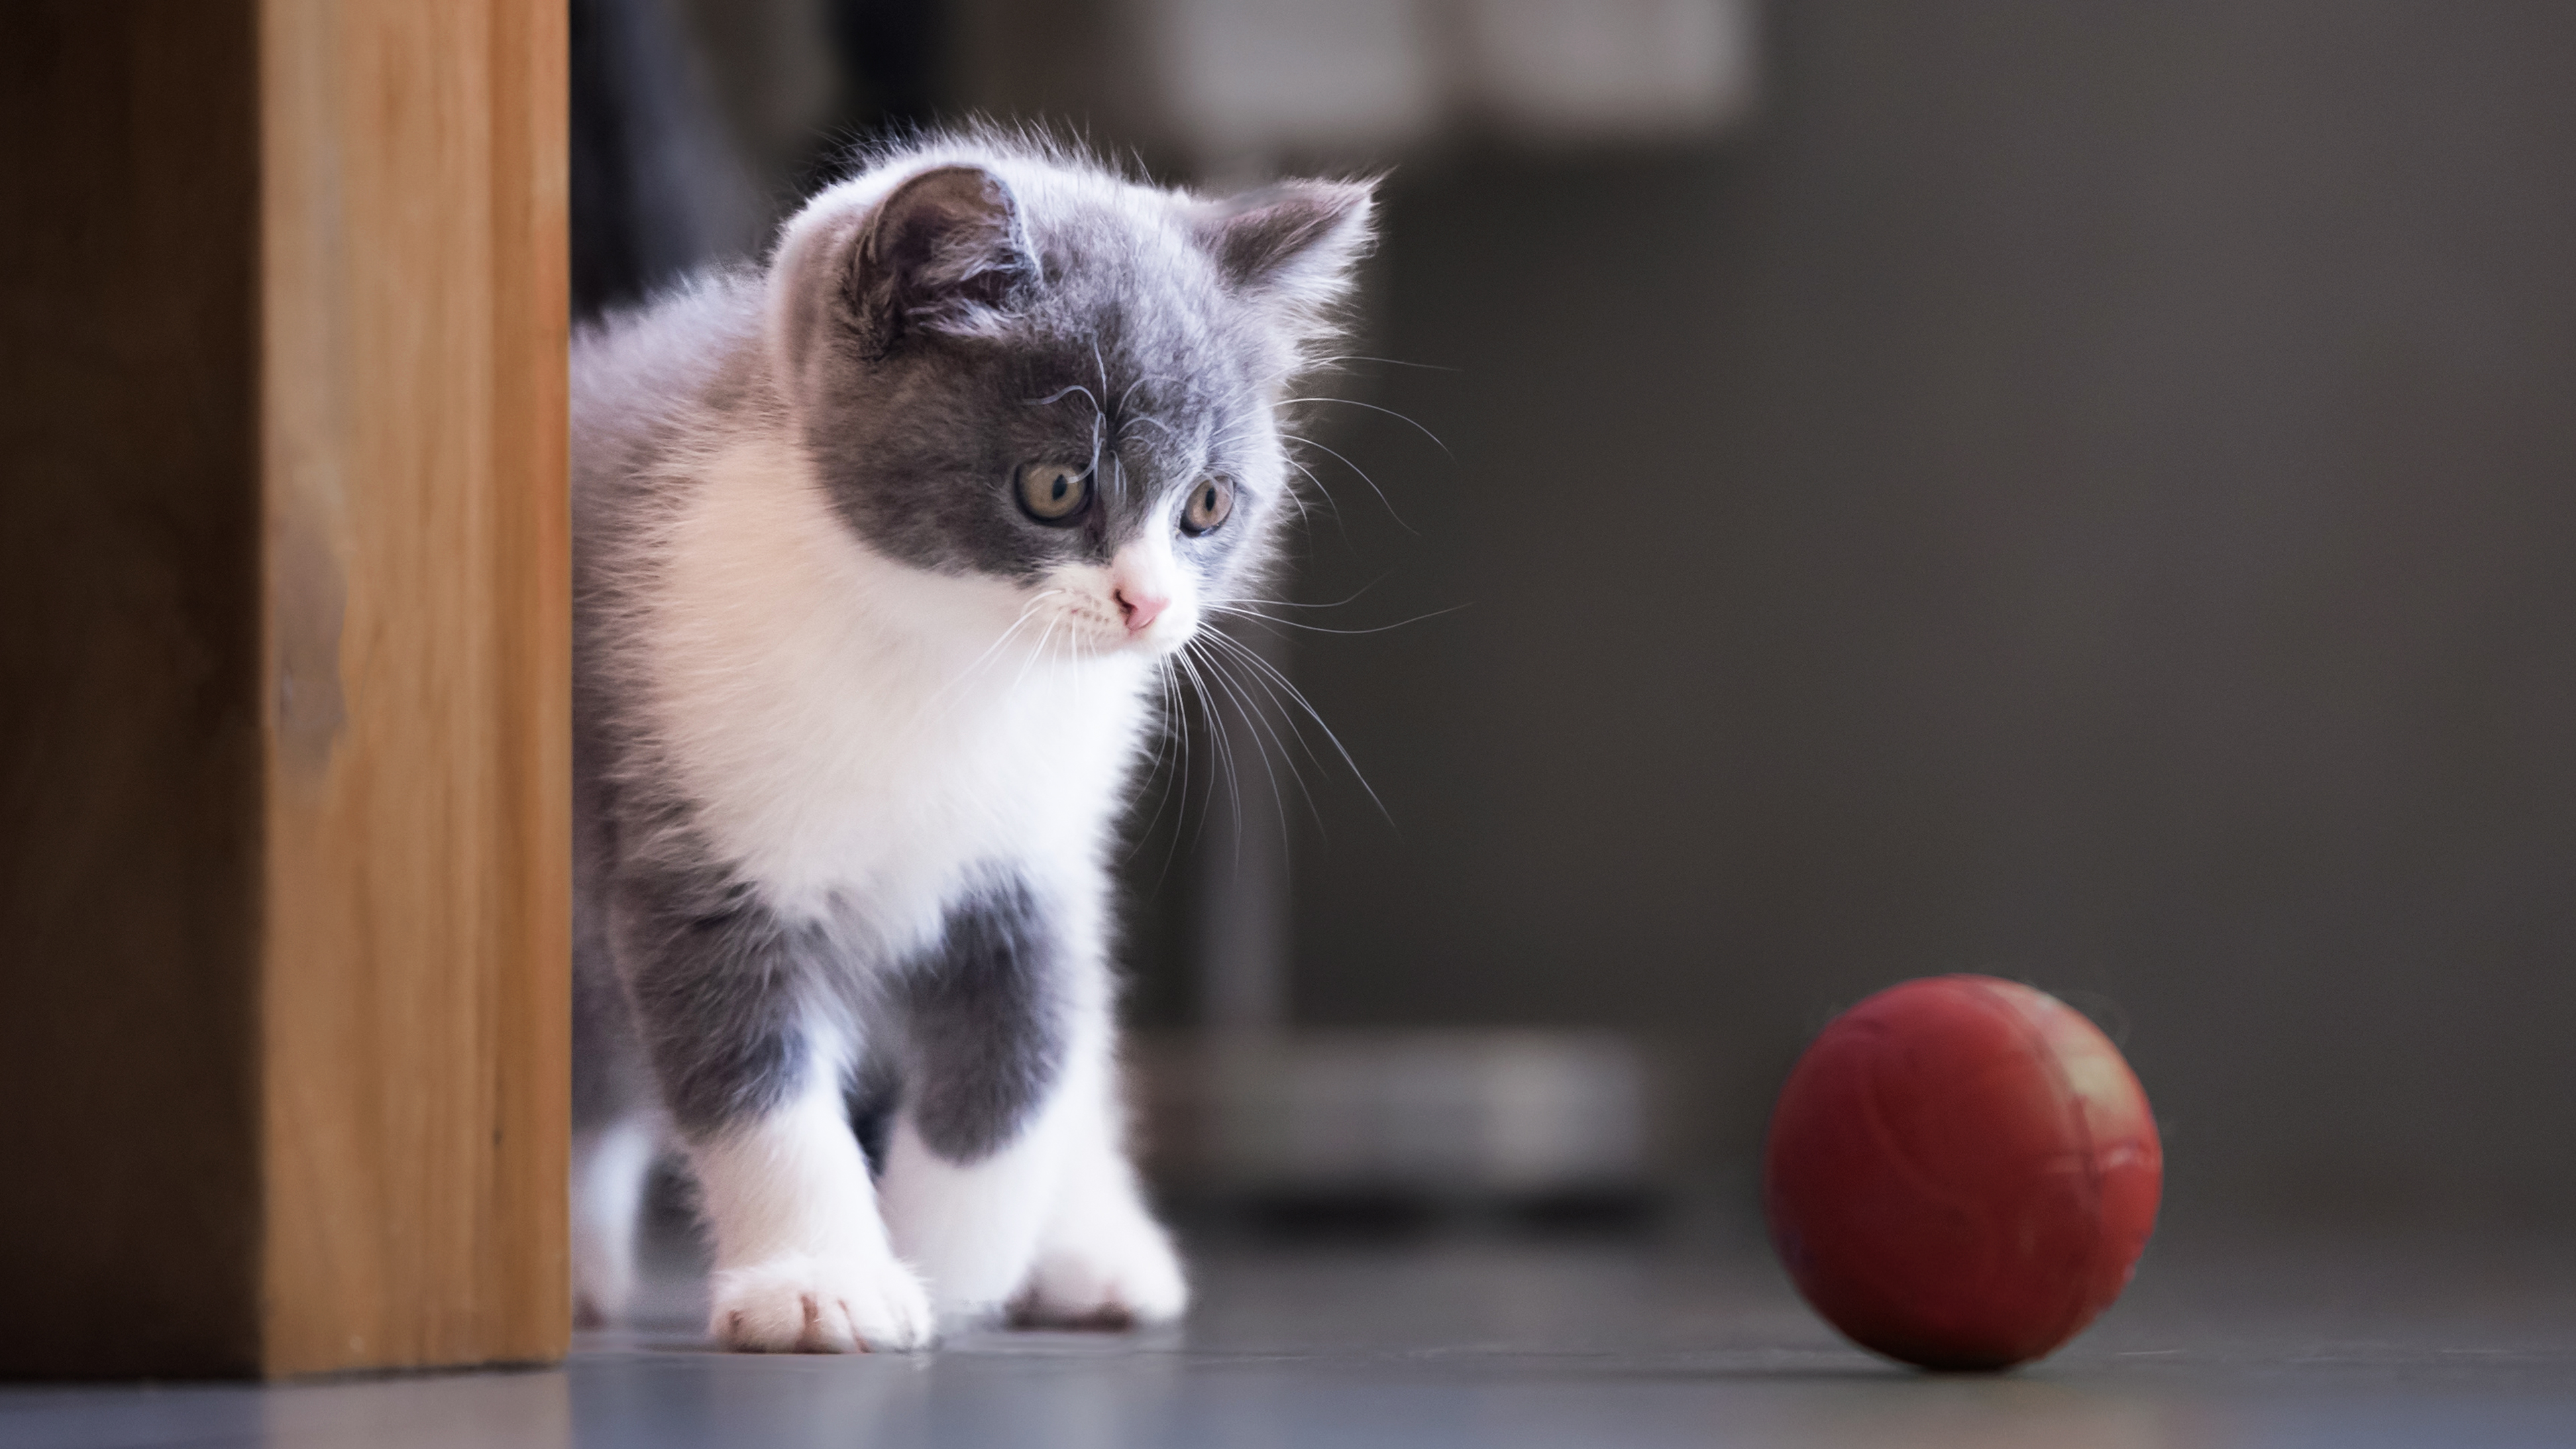 Grey and white kitten playing indoors with a red ball